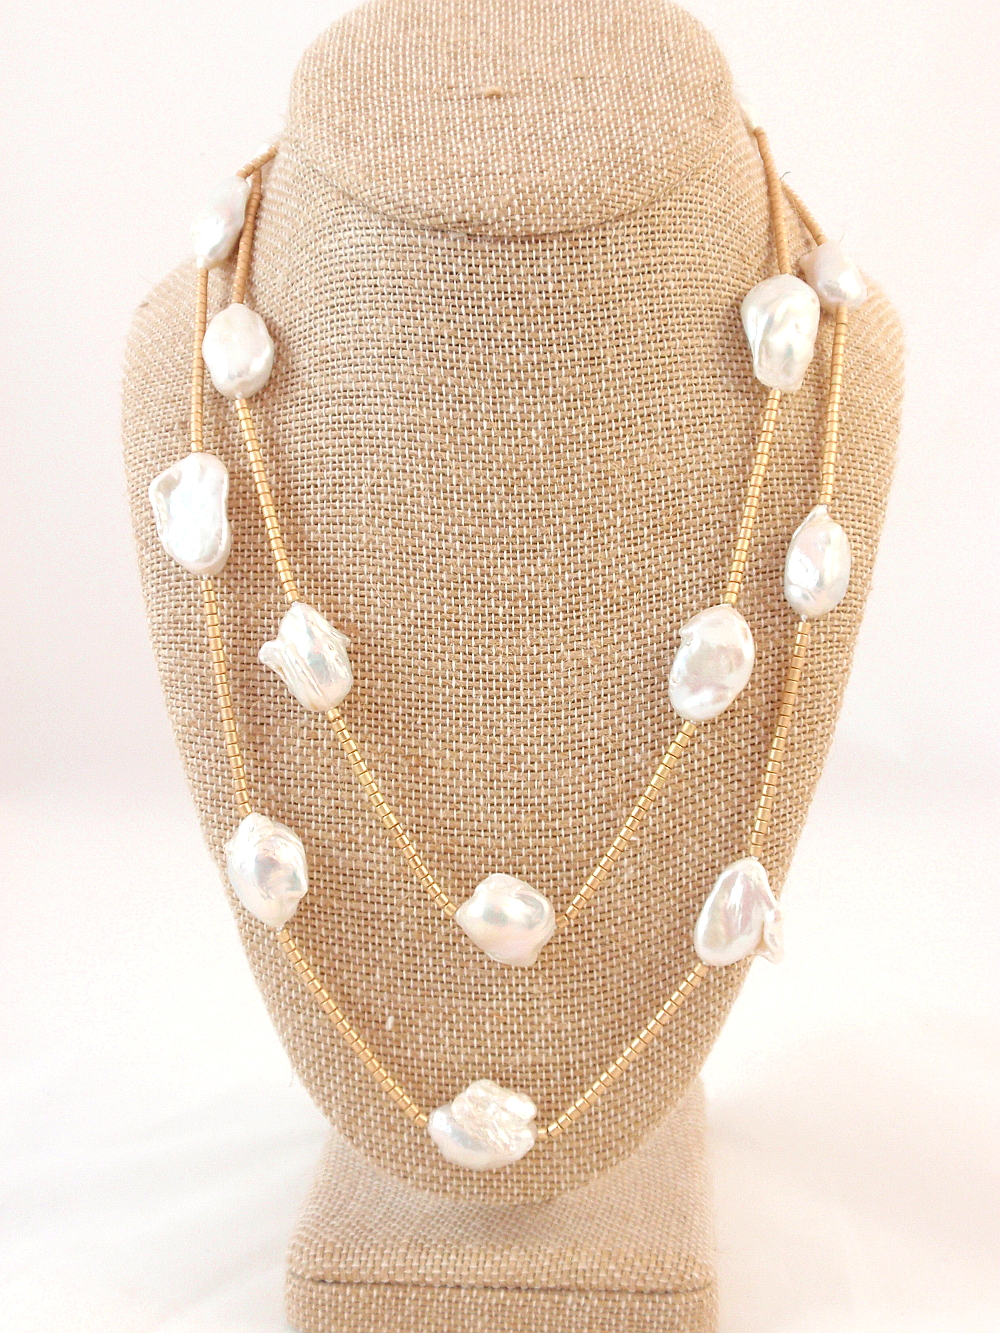 Le511 39 Baroque Pearl Necklace The Island Pearl